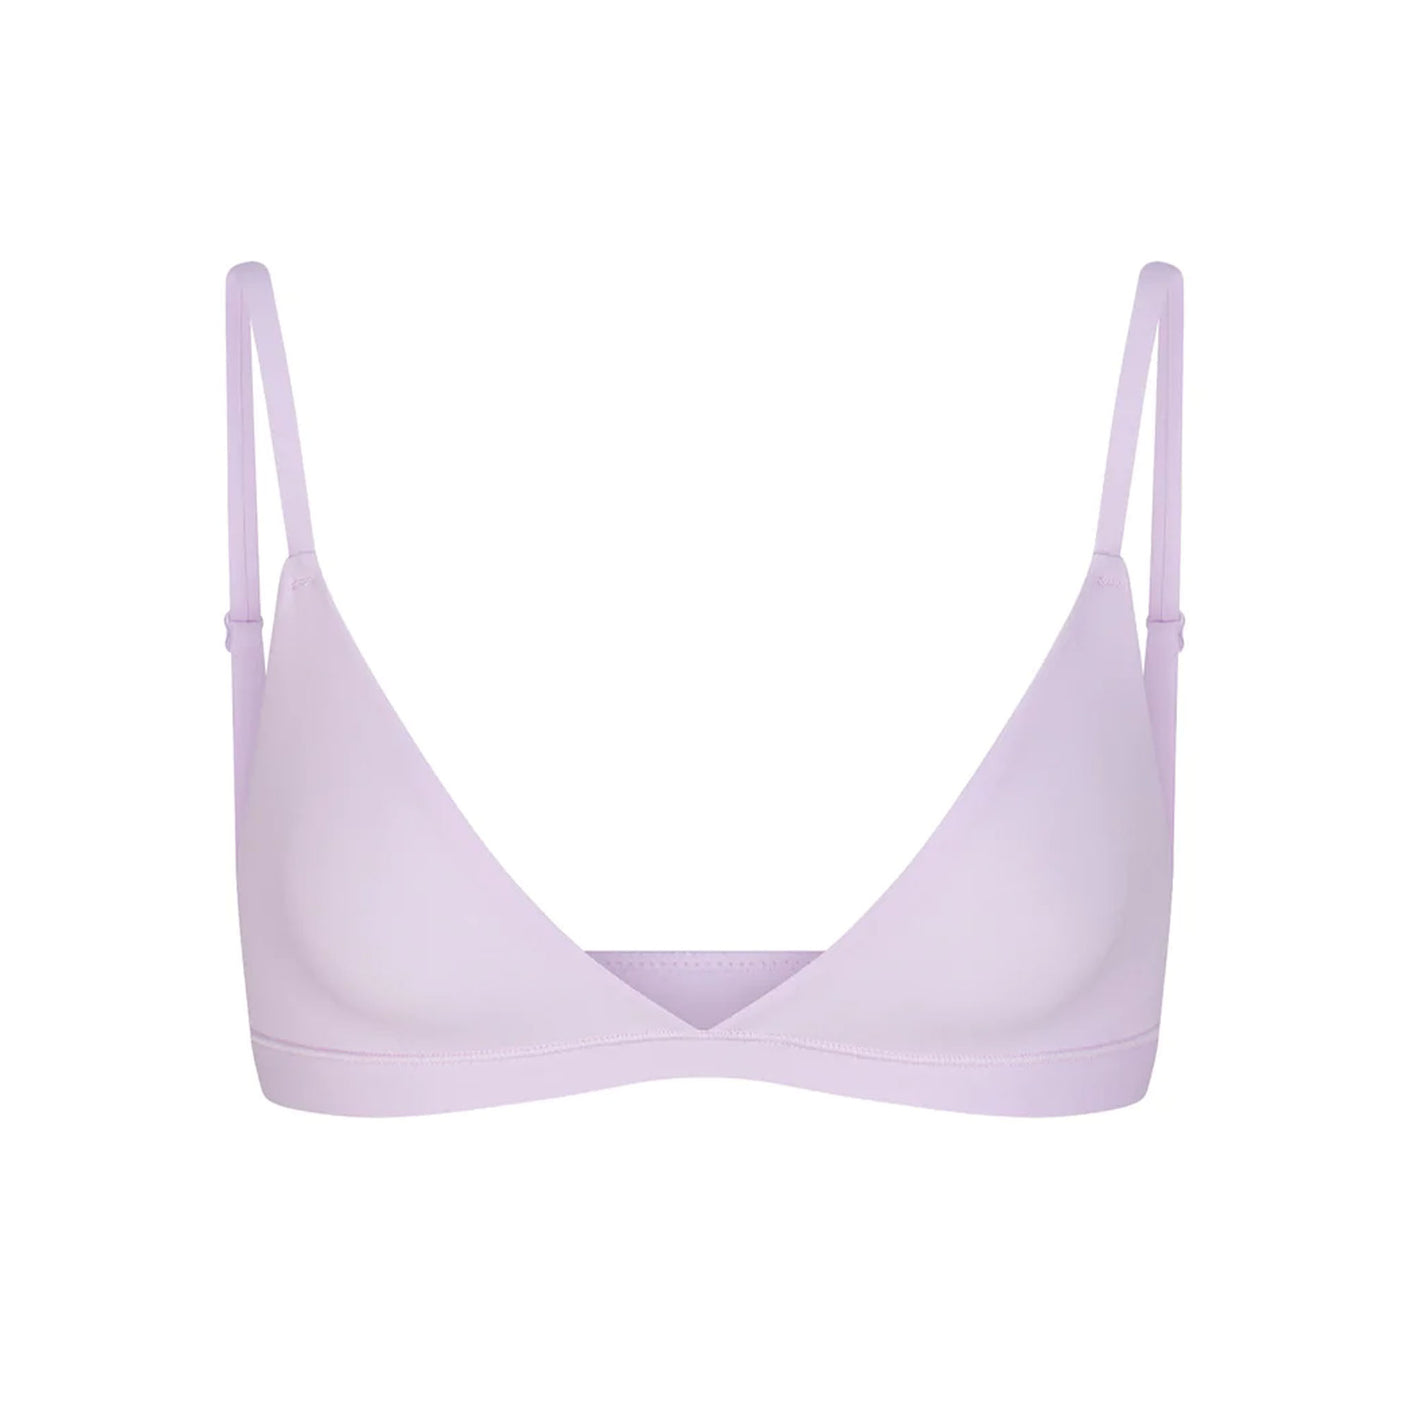 SKIMS NWT summer mesh bralette lilac swirl small - $26 New With